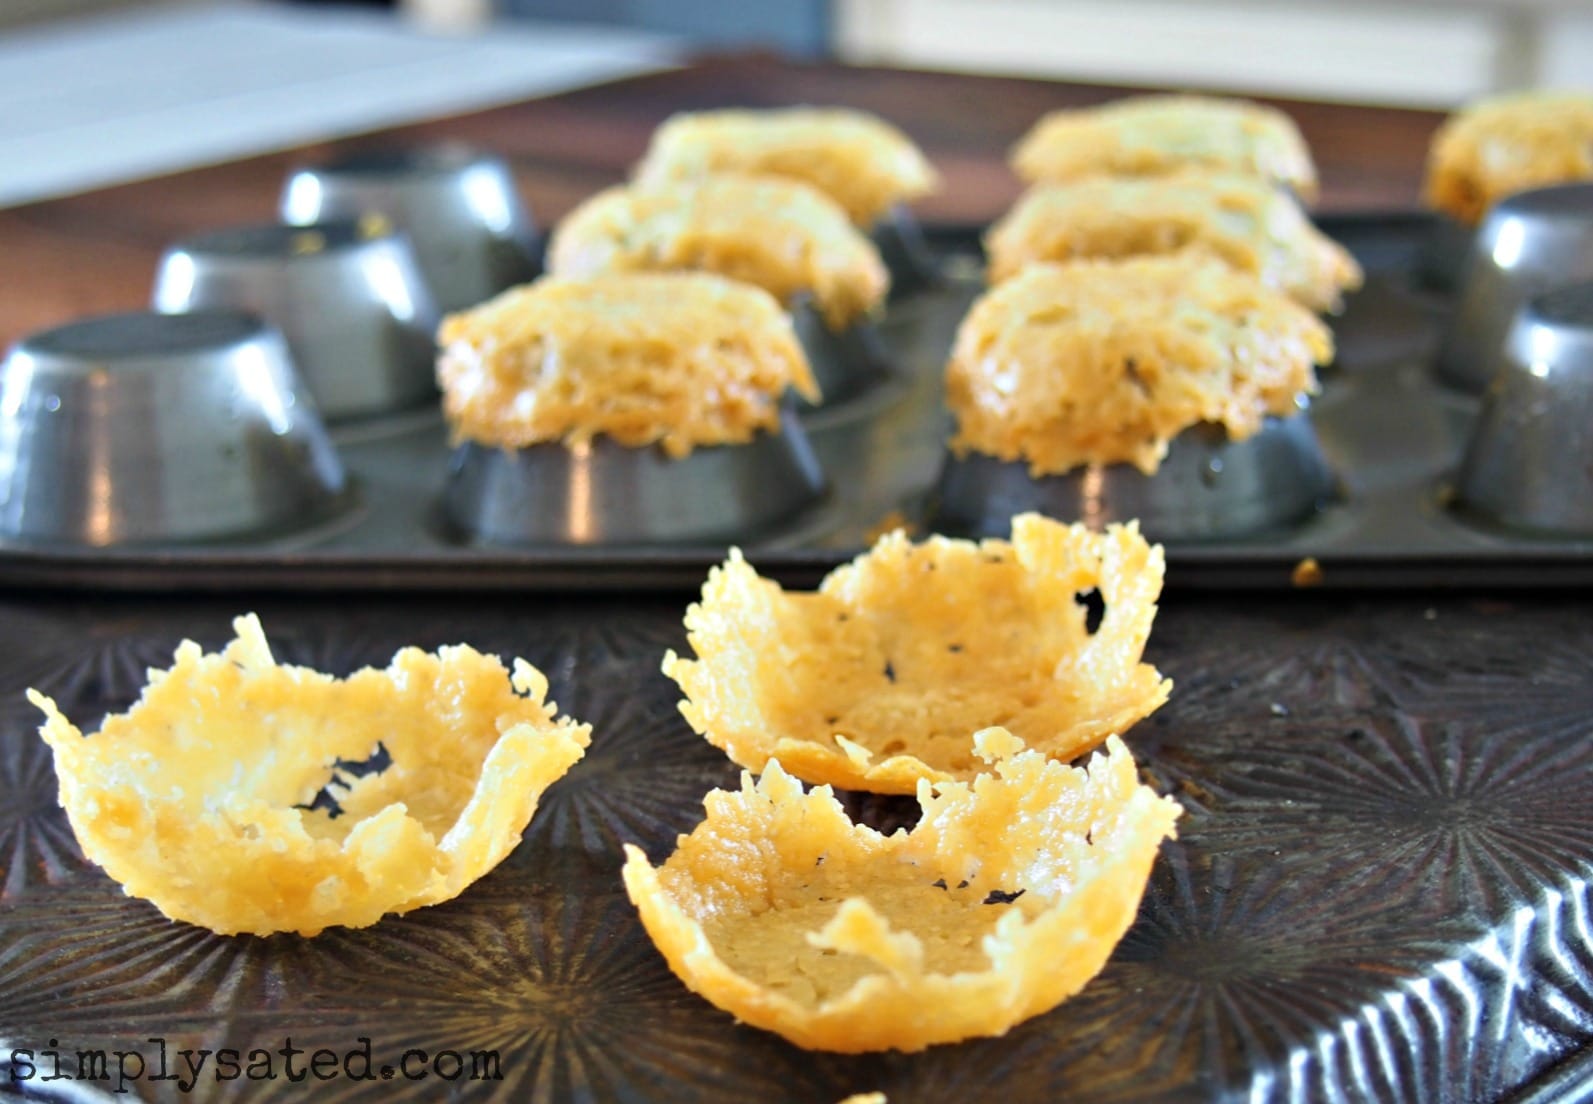 Beautiful Cheese Cup Appetizers to fill with your favorite ingredients.  www.simplysated.com